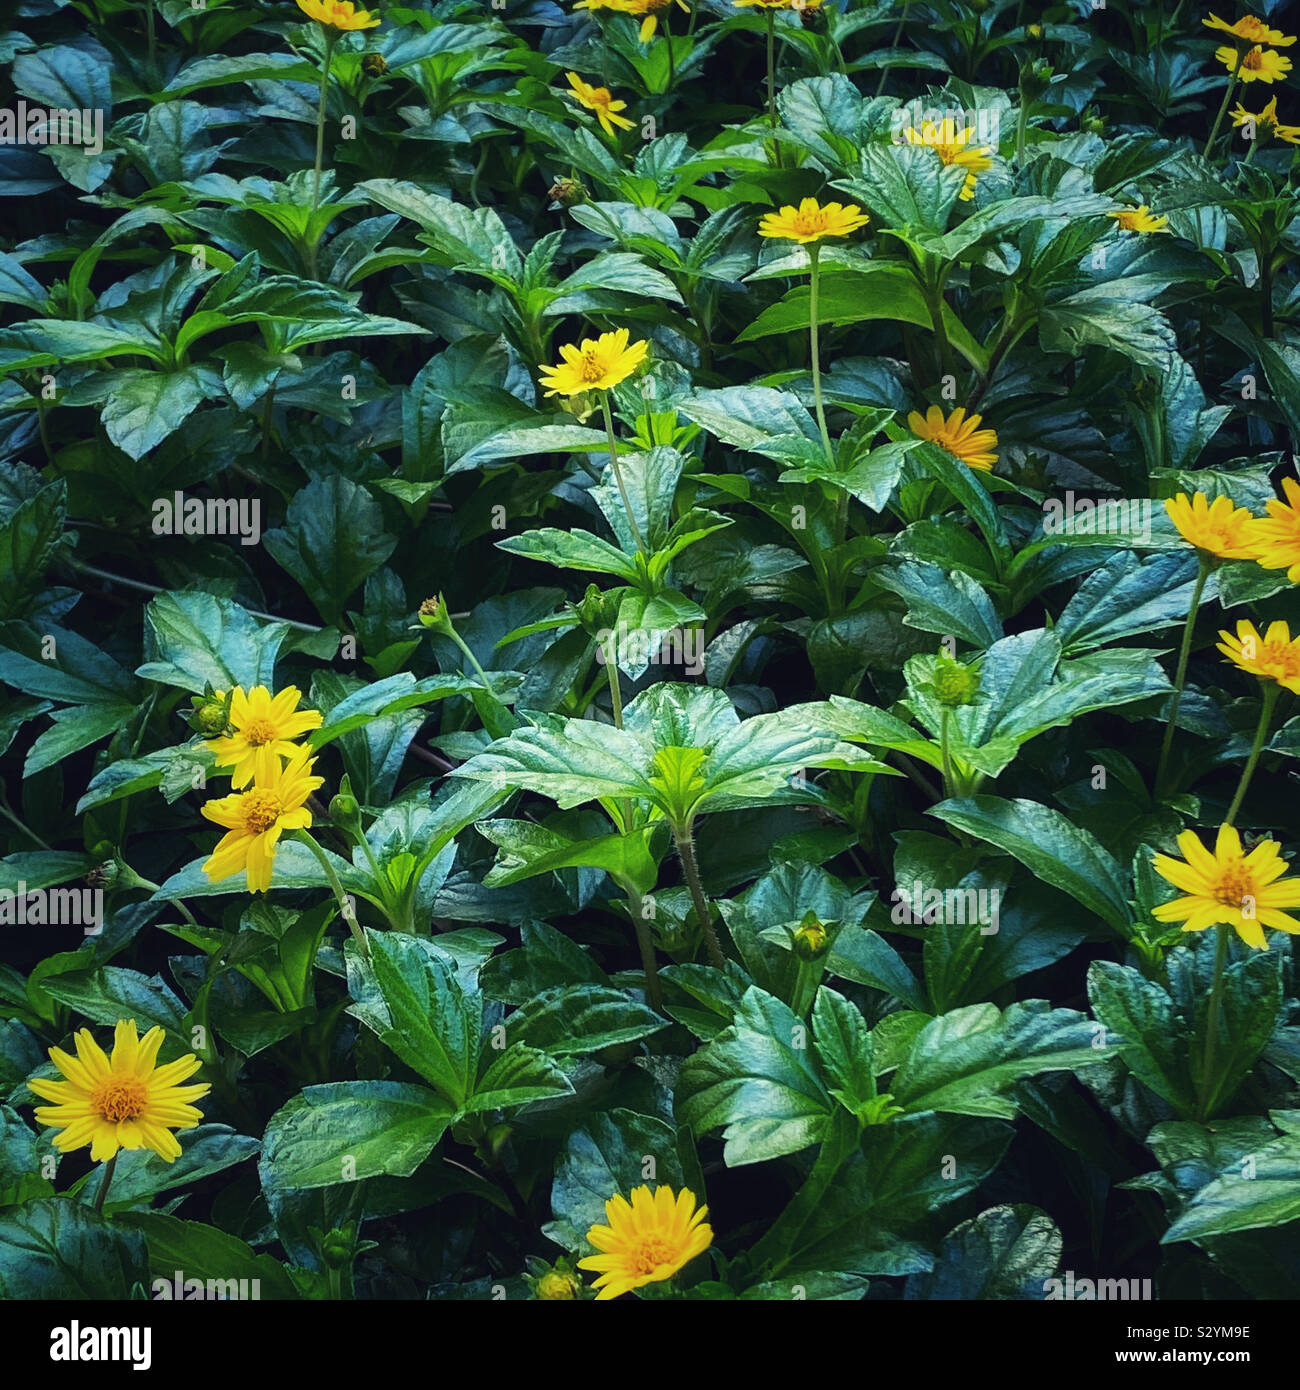 Wedelia flowering groundcover with small yellow daisies Stock Photo